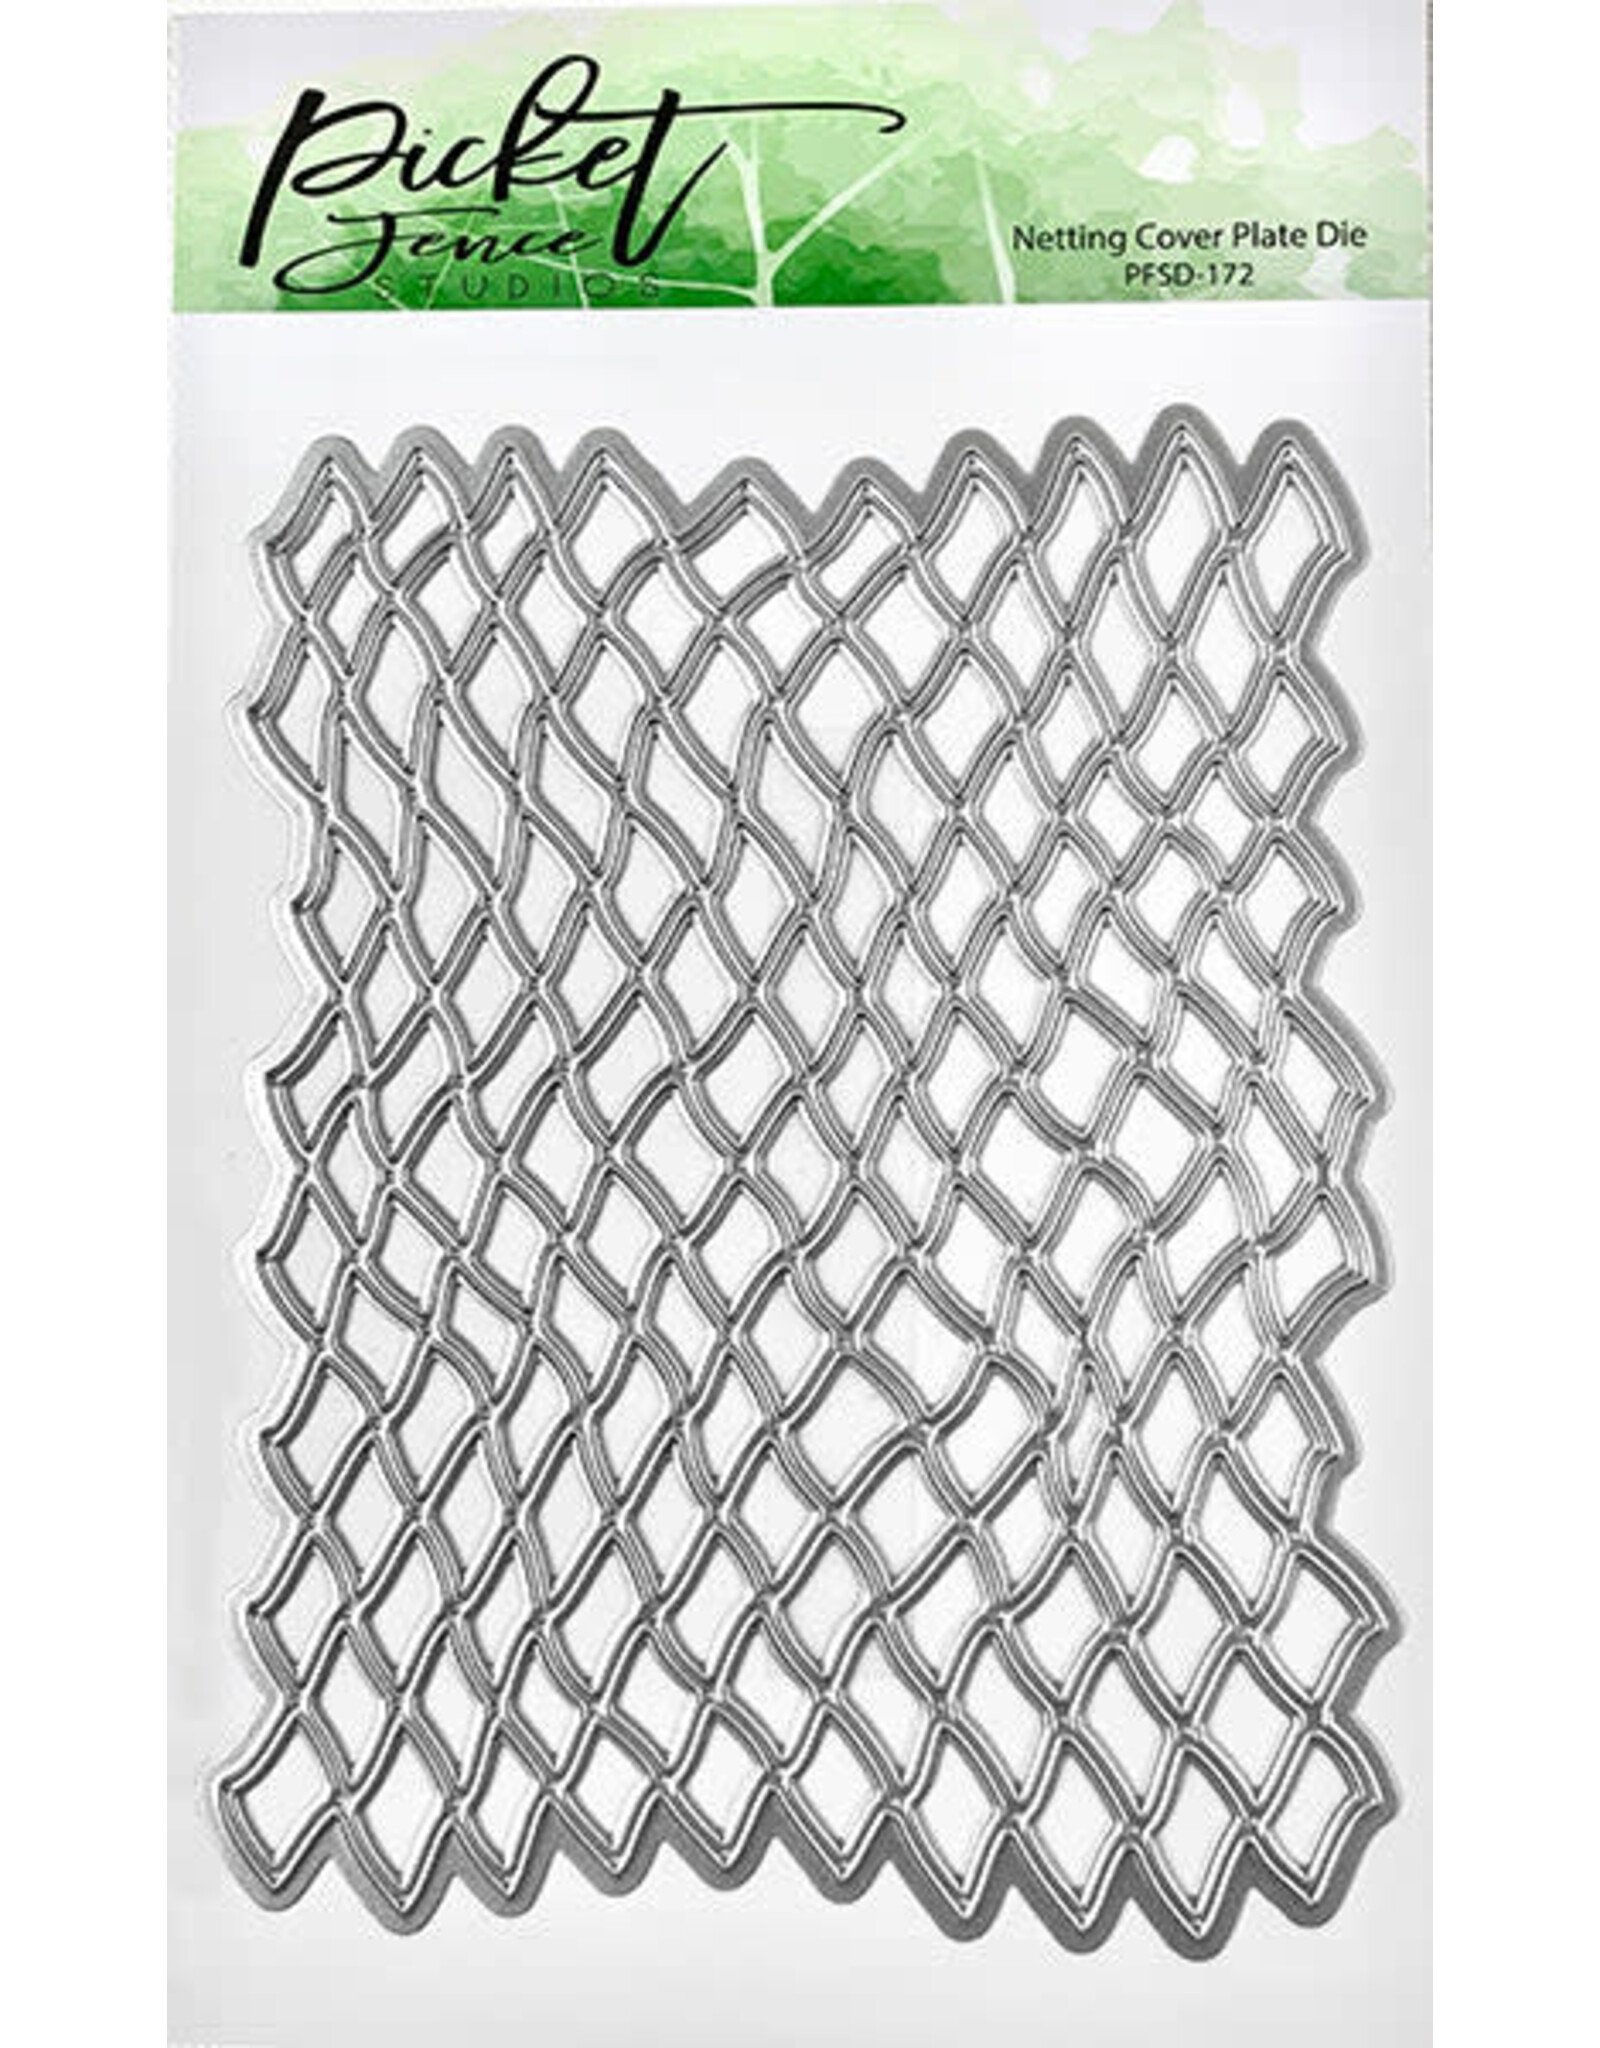 PICKET FENCE PICKET FENCE STUDIOS NETTING COVER PLATE DIE